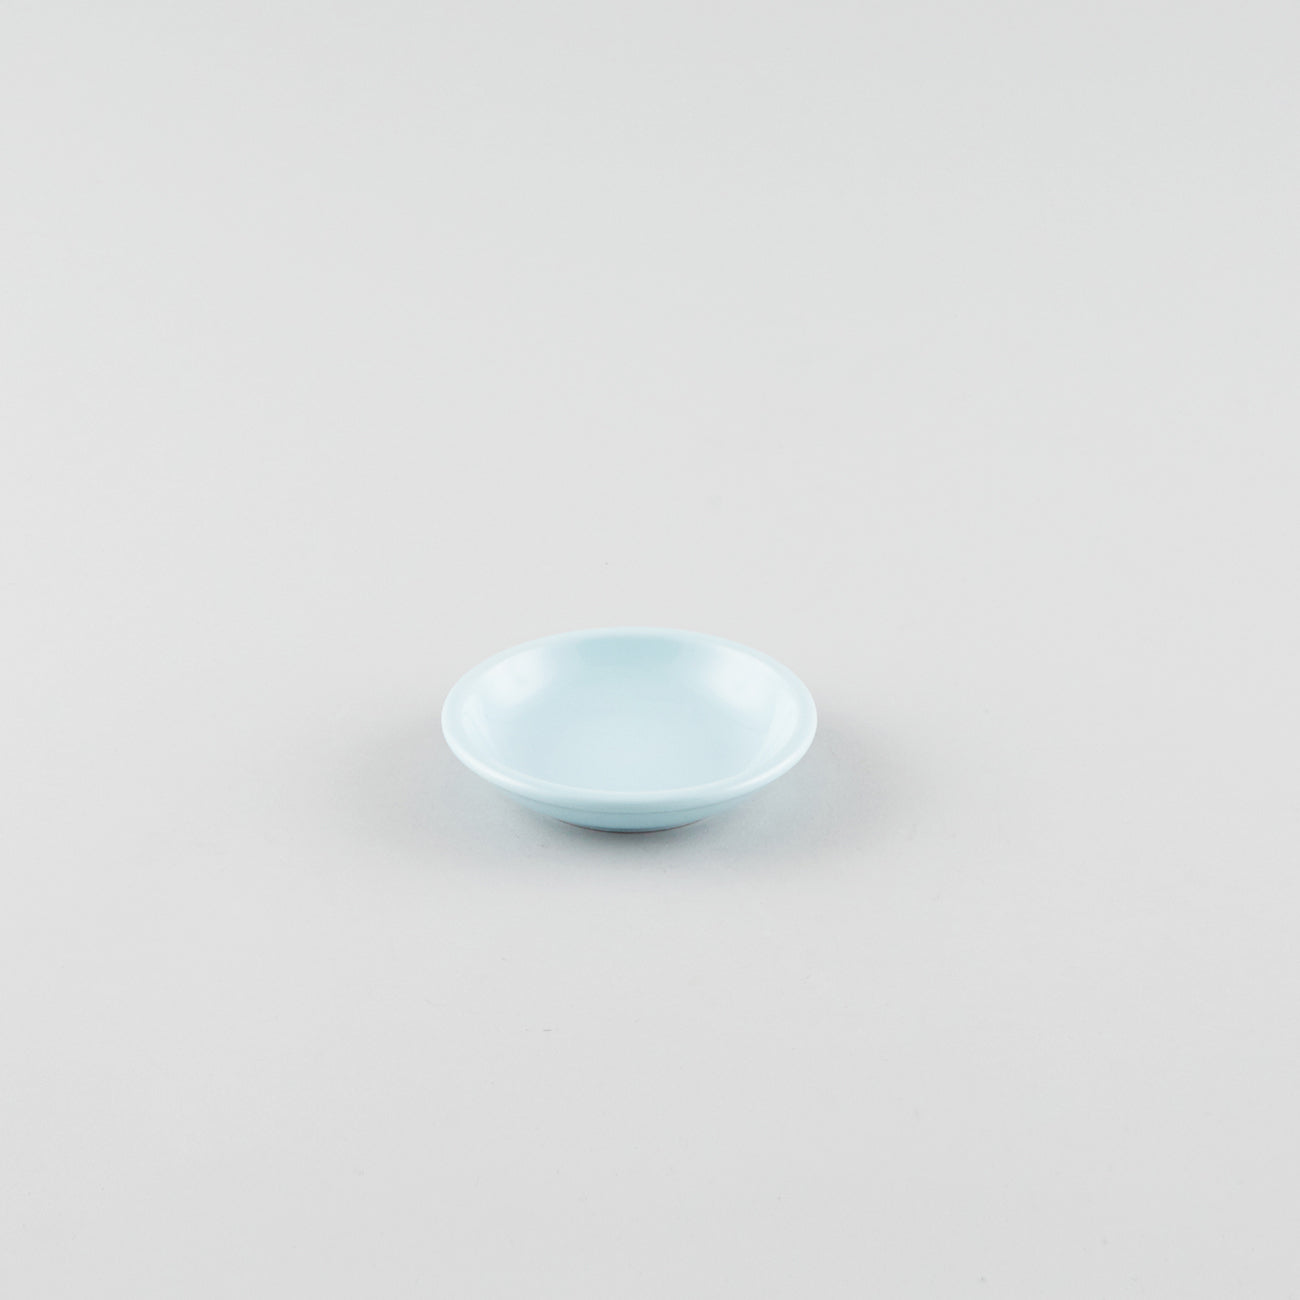 Round Soy Sauce Dish - Blue (L)